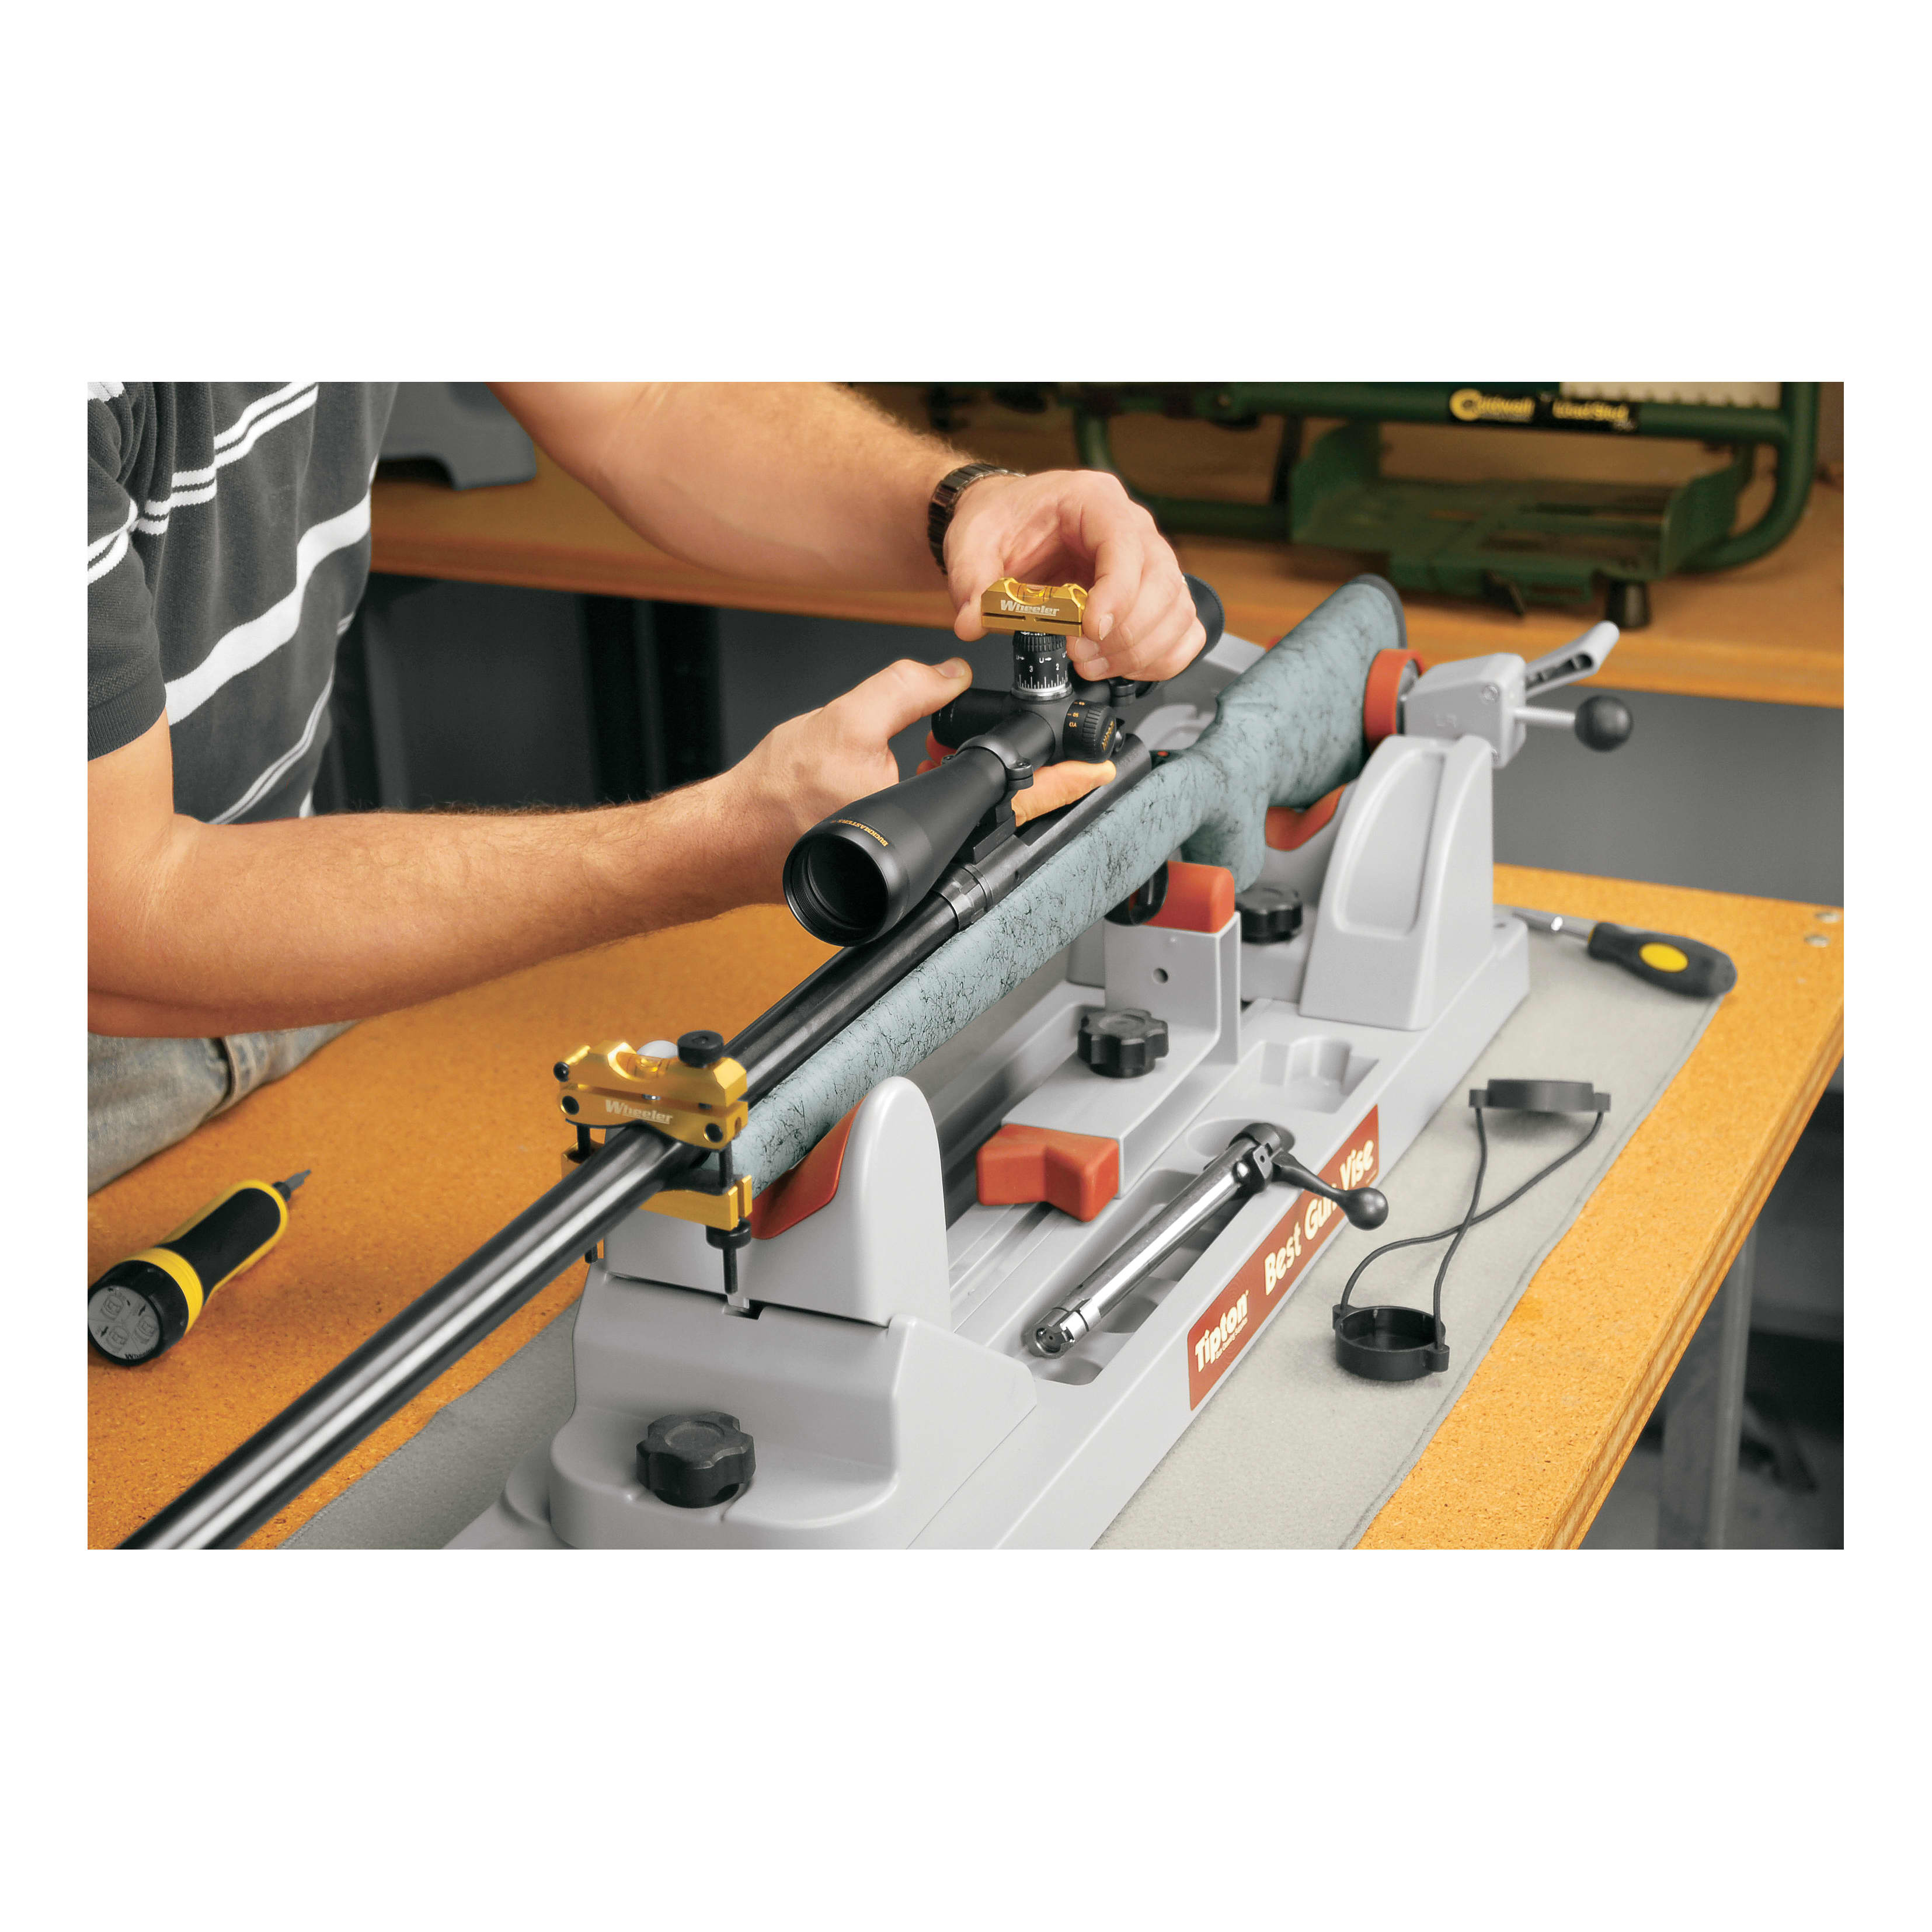 Wheeler Pro Reticle Leveling System - In Use